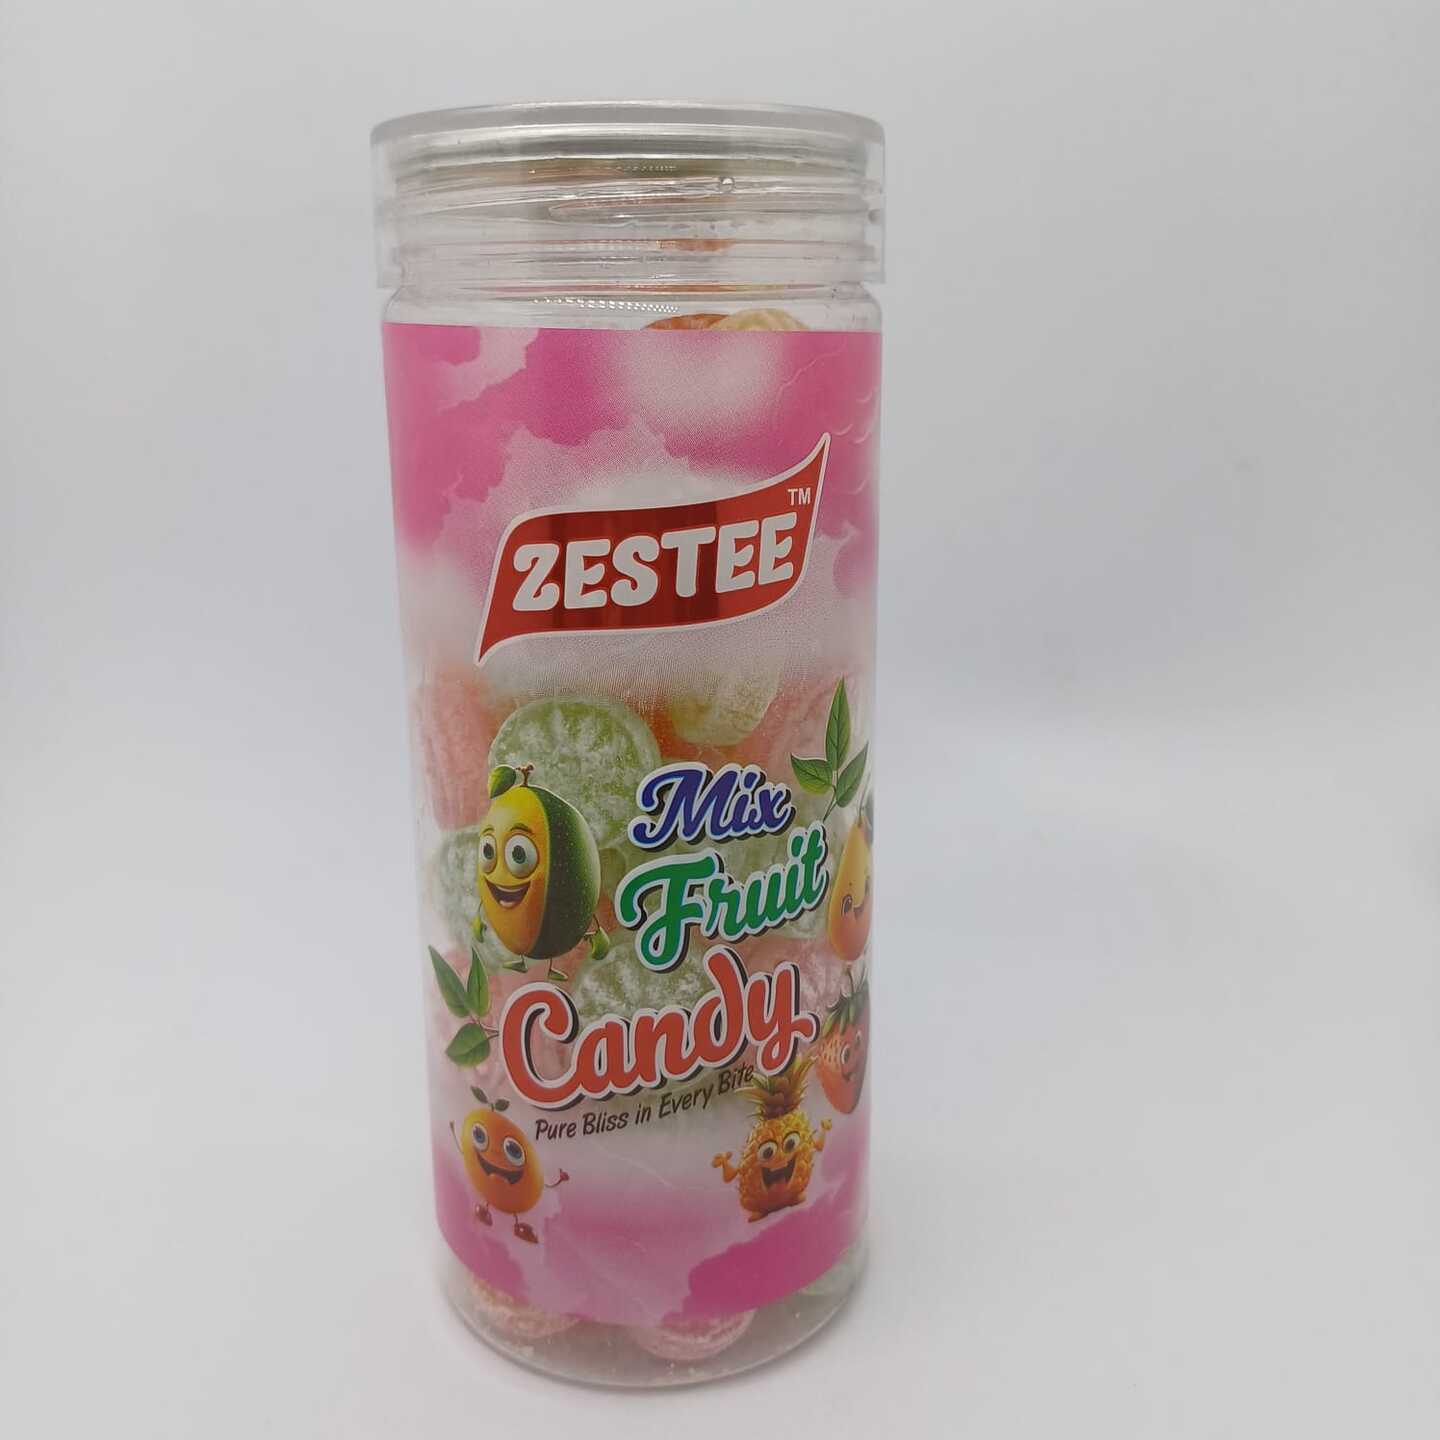 ZESTEE Flavoured Sugar Sweet & Chatpata Candy Khatti Meethi Toffee for Kids 220gm (Mix Fruit)